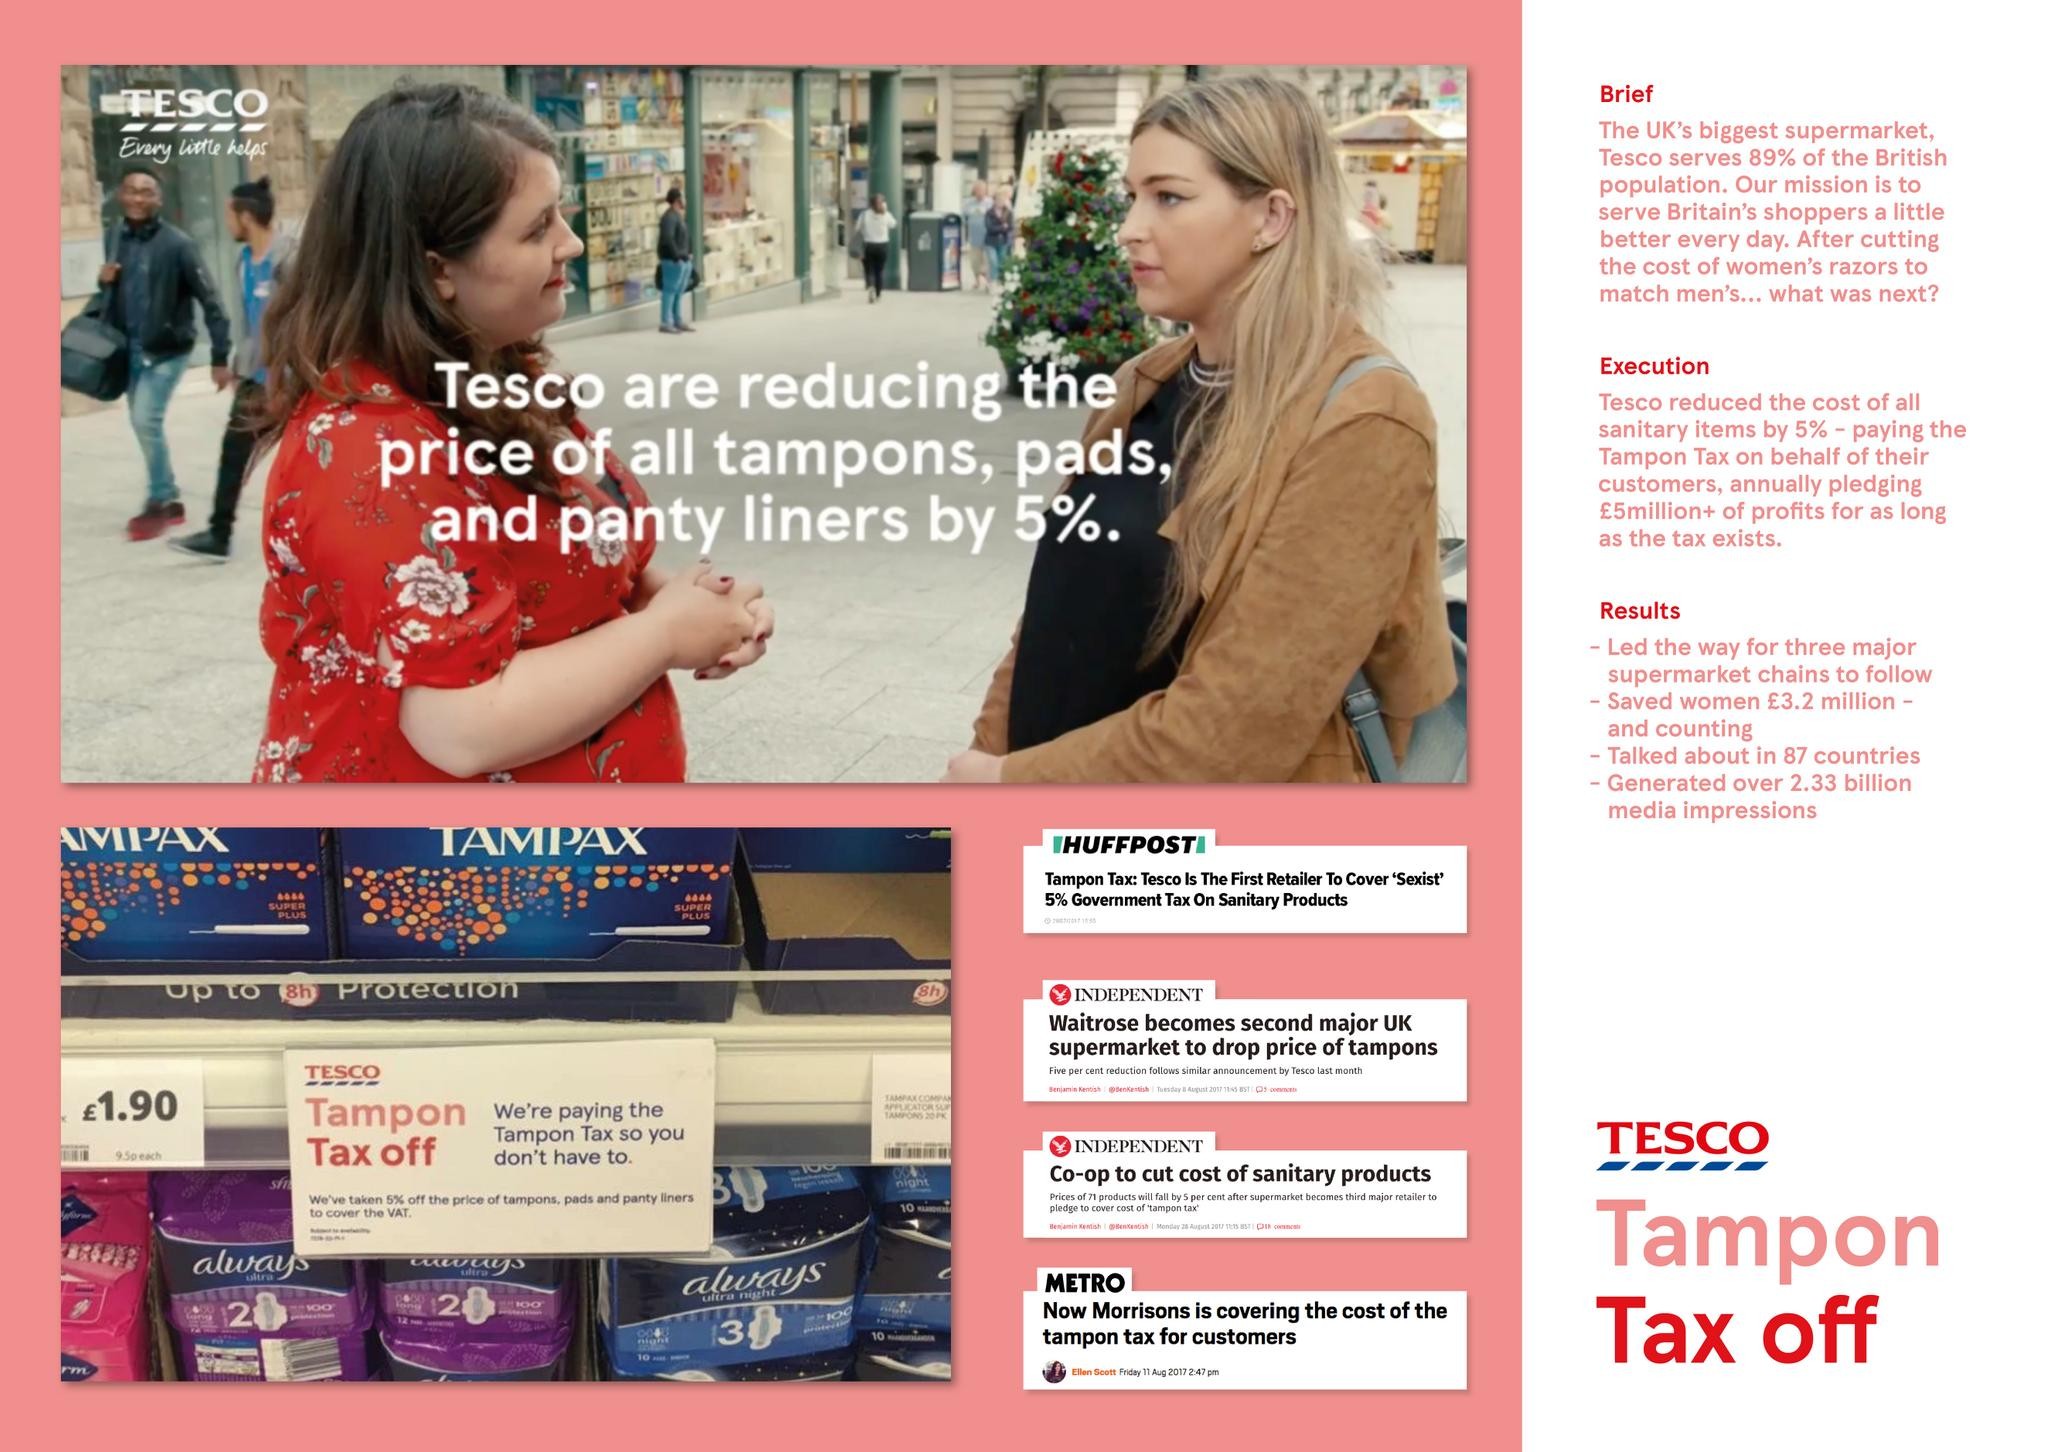 TAMPON TAX OFF